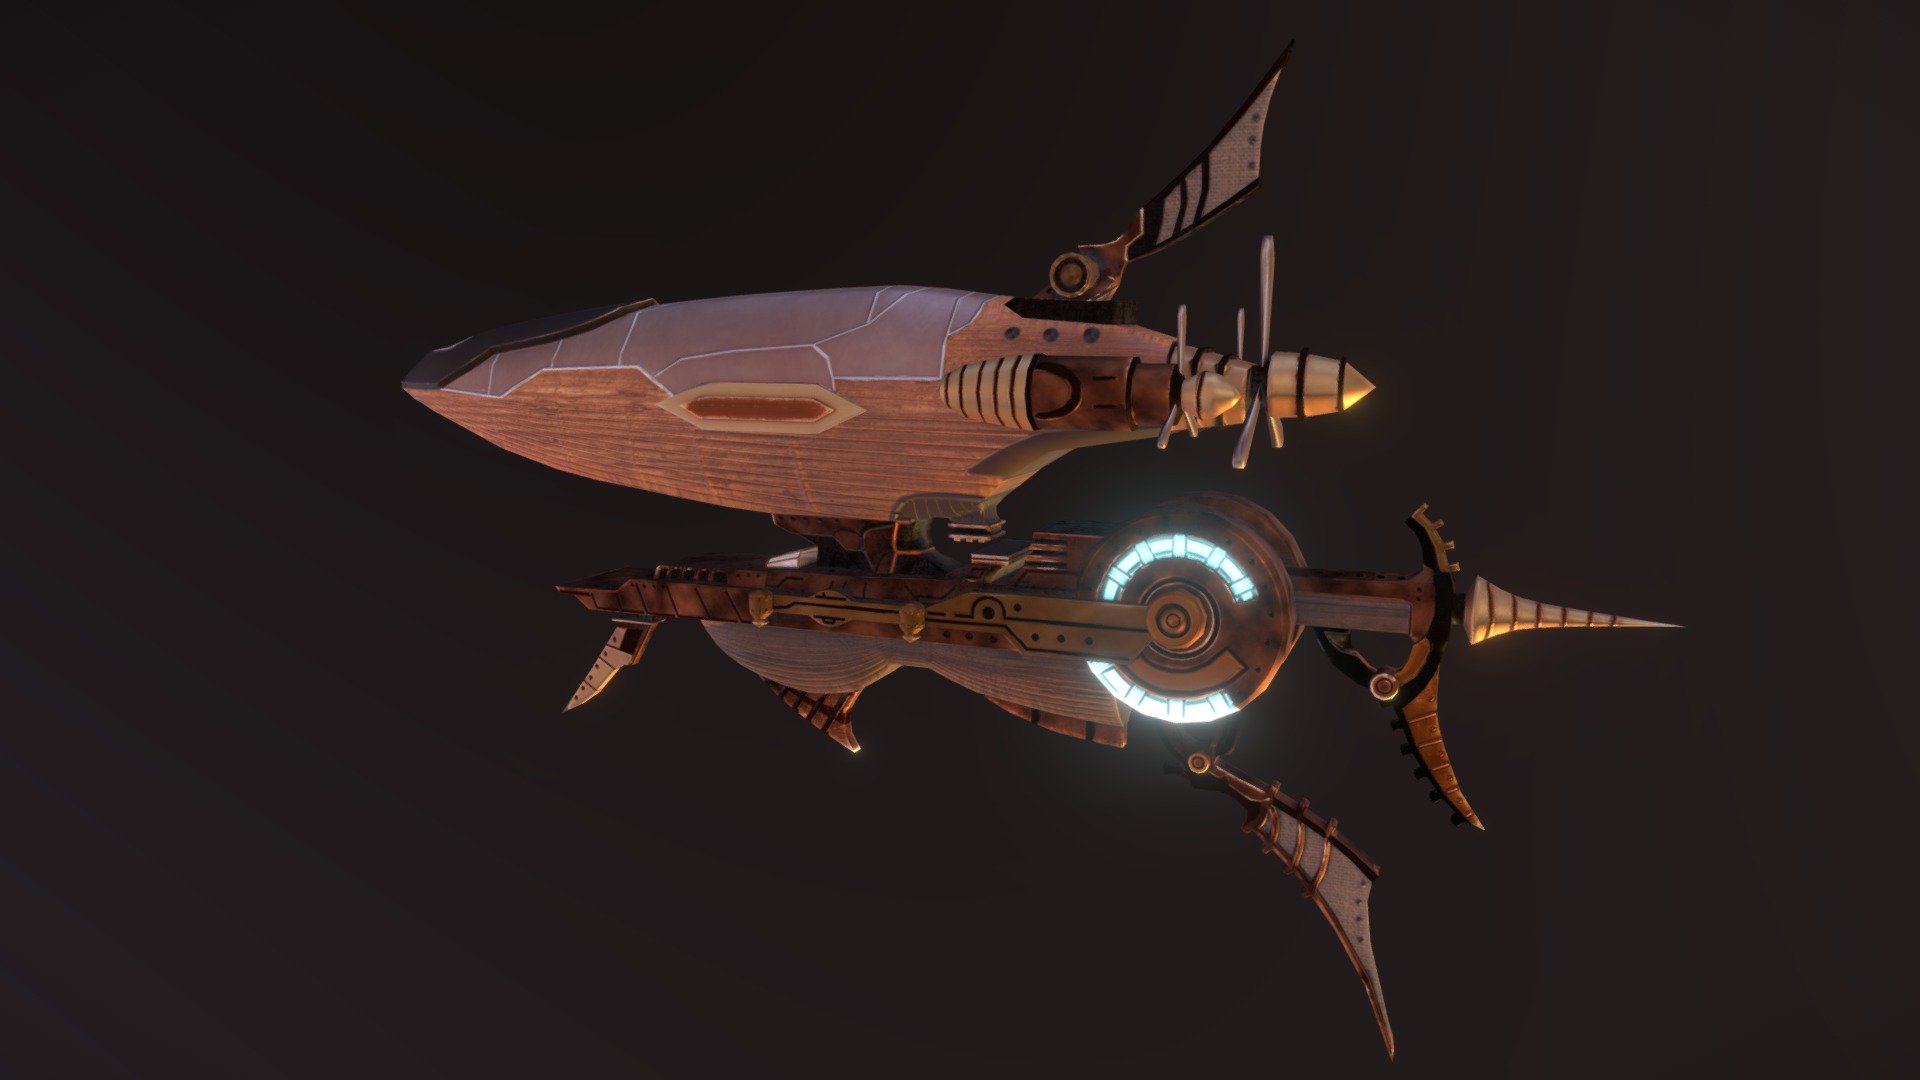 https://www.artstation.com/artwork/nzBRO

This is a model based on a concept art for an airship from Final Fantasy Type-0  (Square Enix). (Fanart)

It was my first time working on an airship. I made it a few years ago and I have improved quite a bit since then&hellip; but well, still like it! - Airship ~ Final Fantasy Type-0 ~ - 3D model by Ellie DB (@elliedb) 3d model